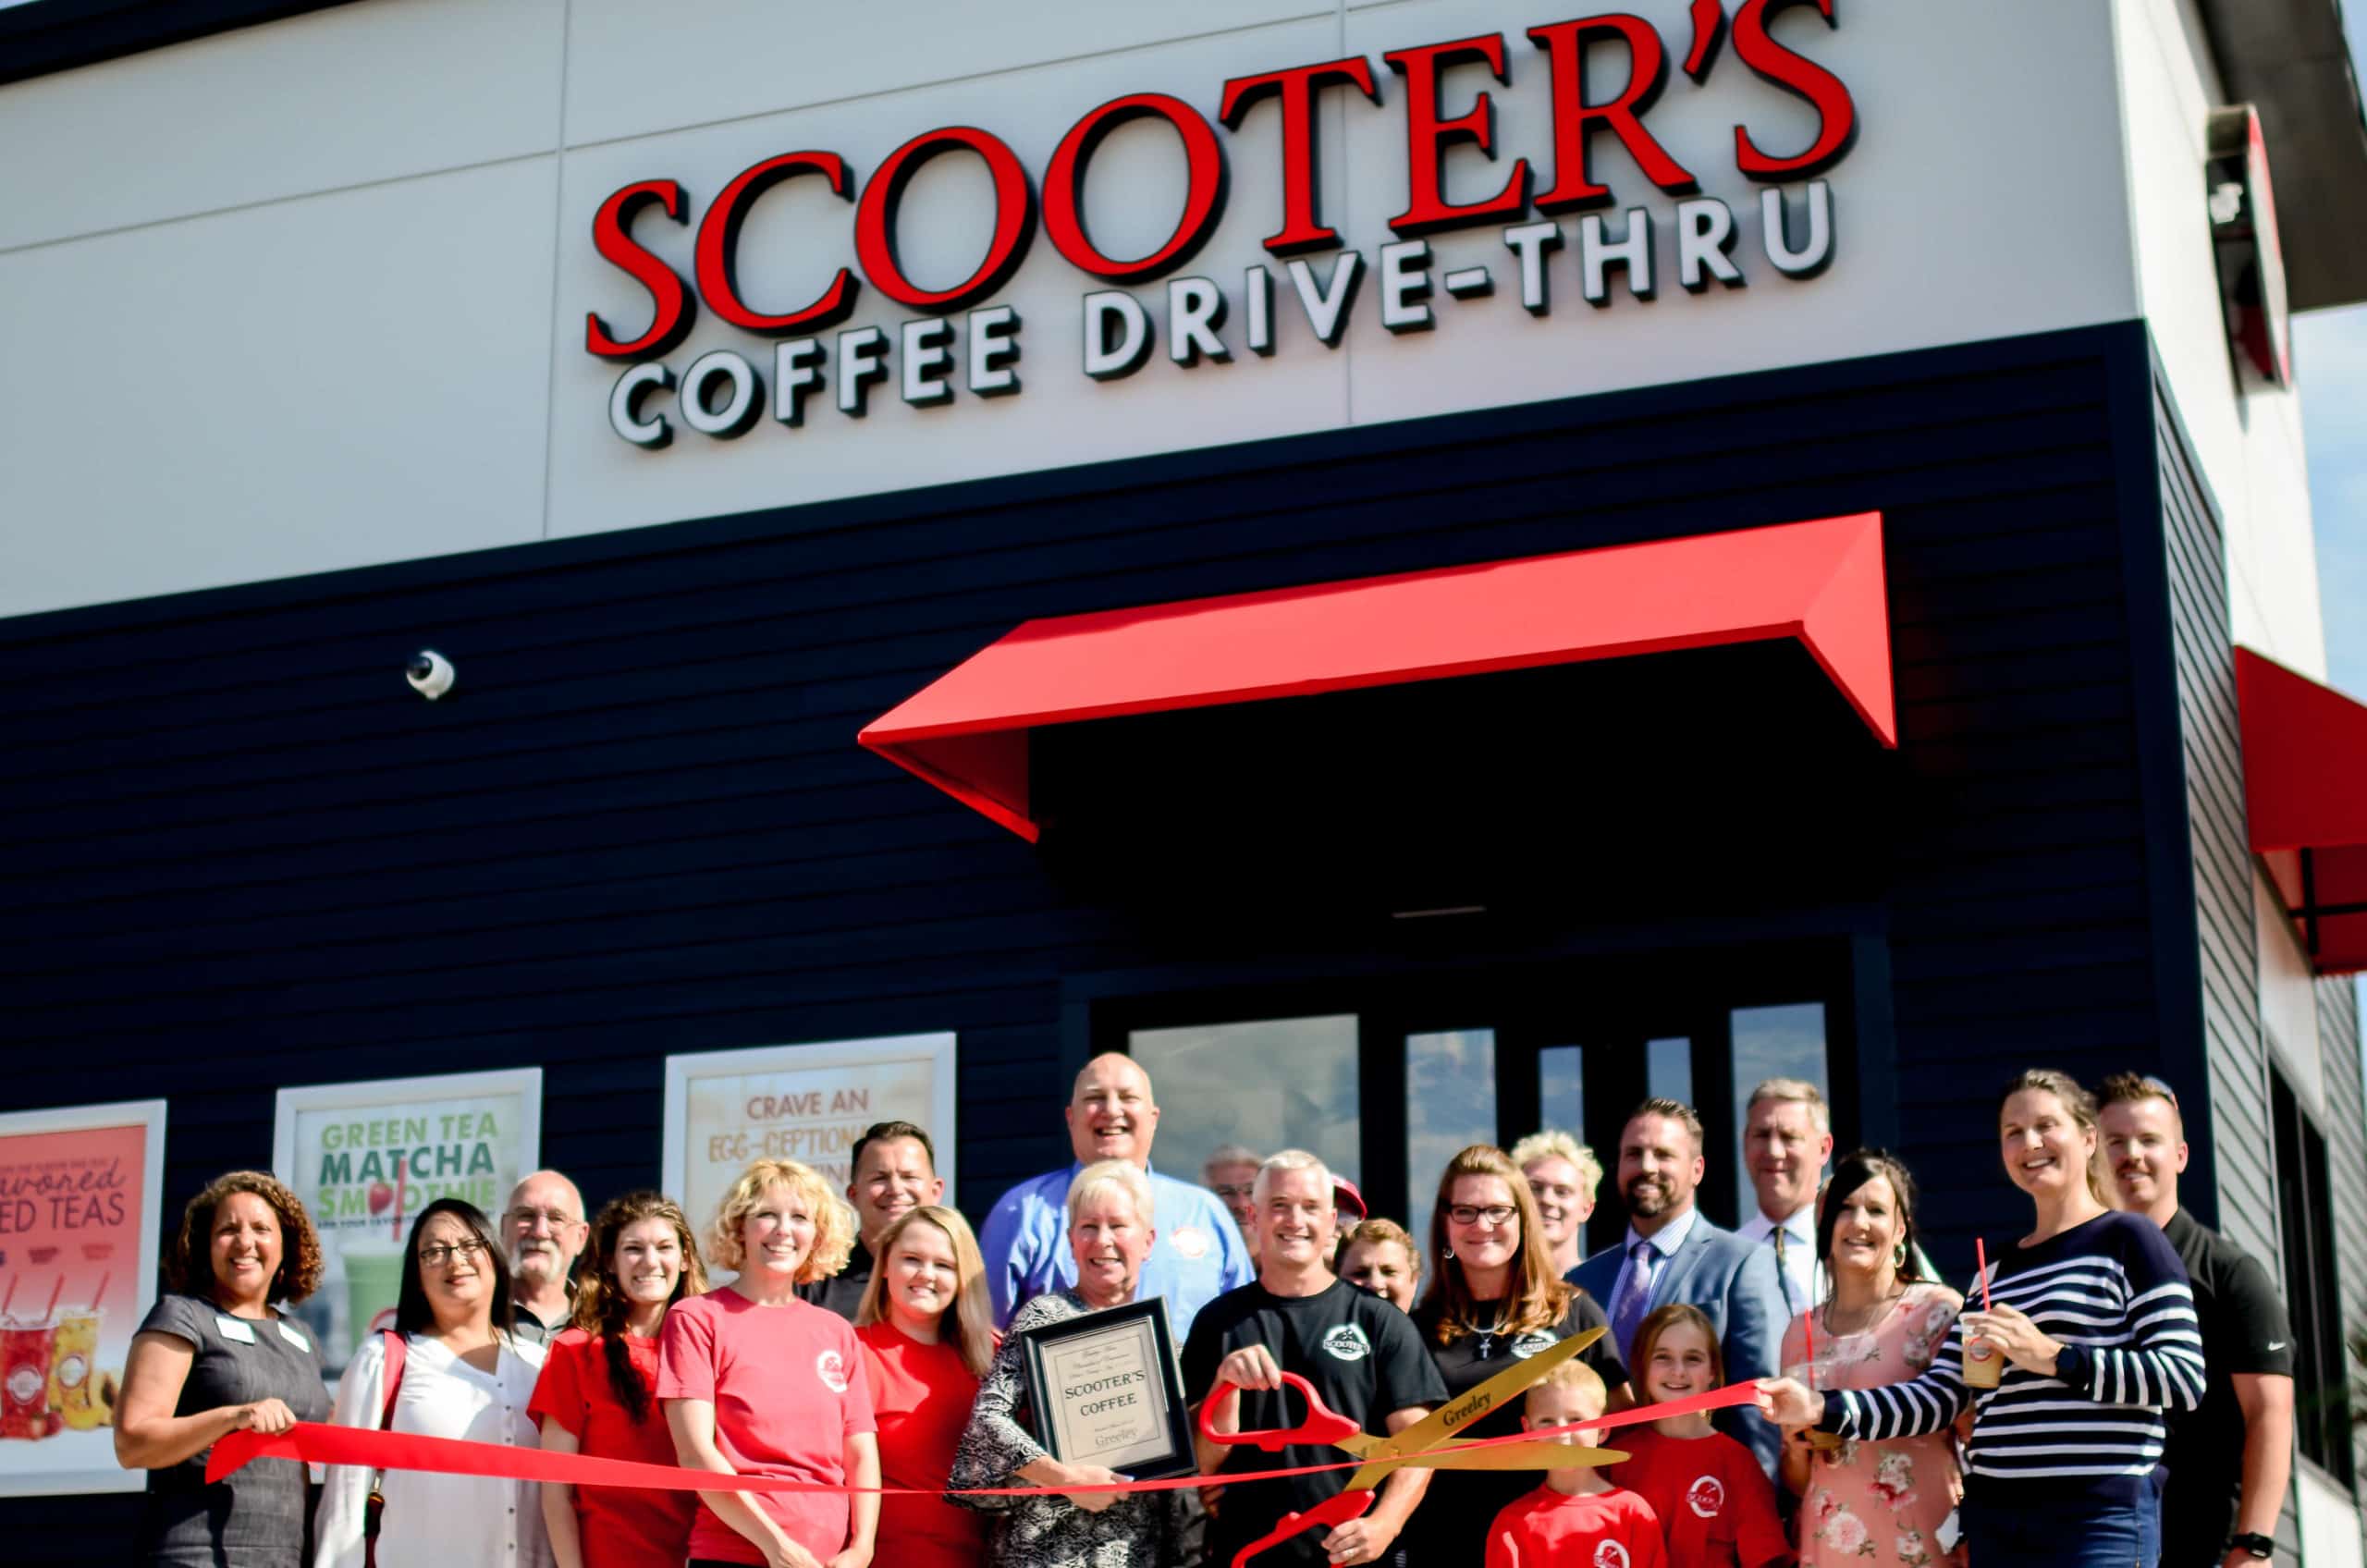 A group of happy people celebrating the opening of a new Scooter's Coffee franchise.